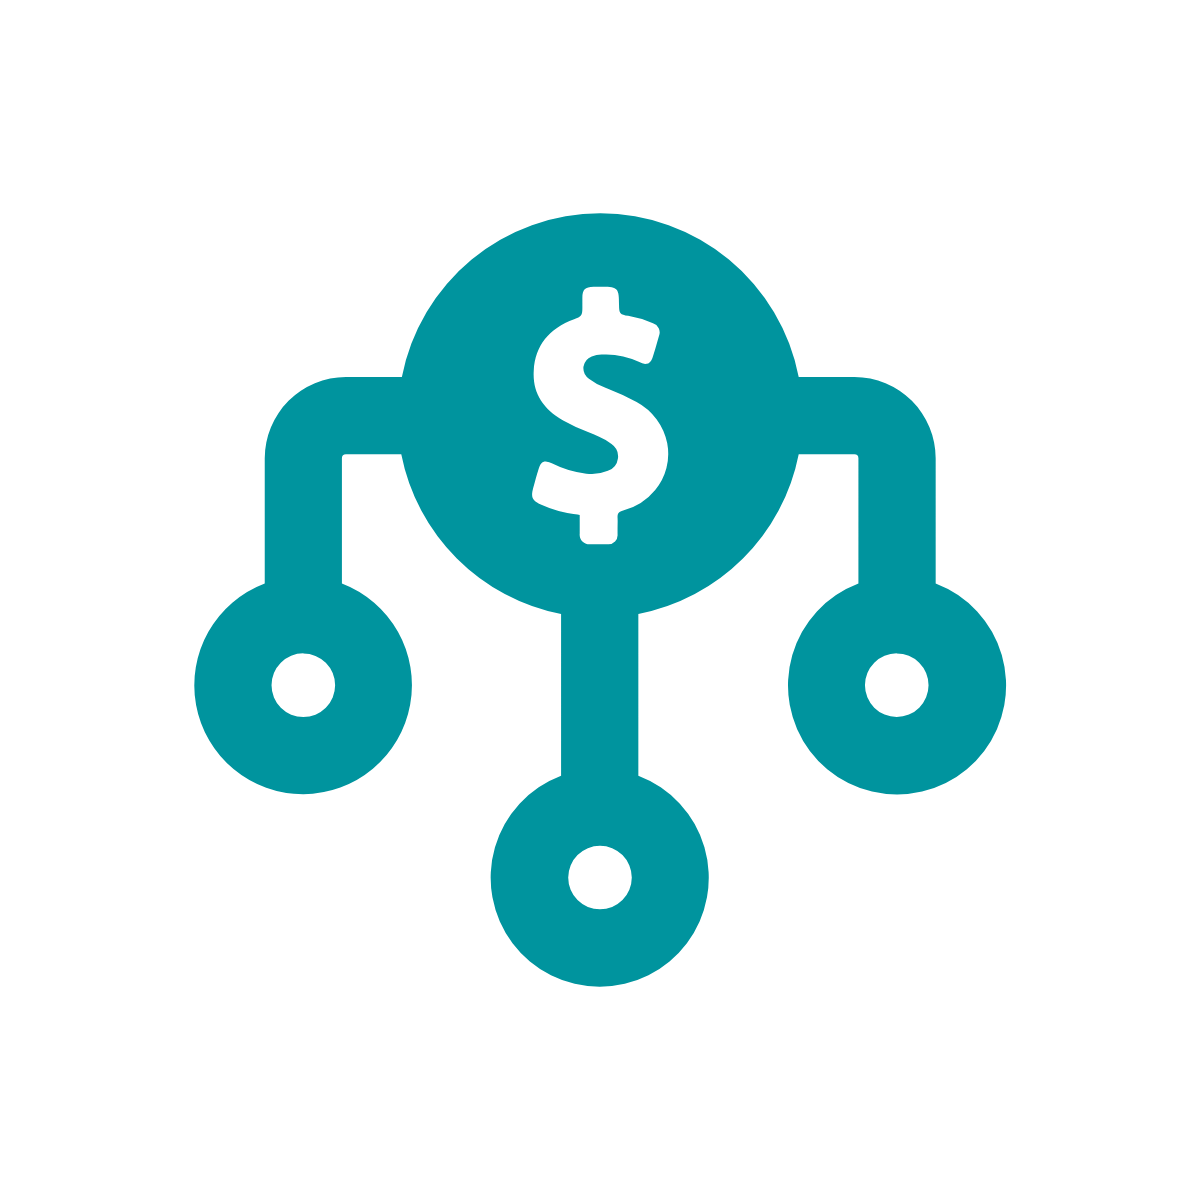 Icon of dollar sign connected to three circles